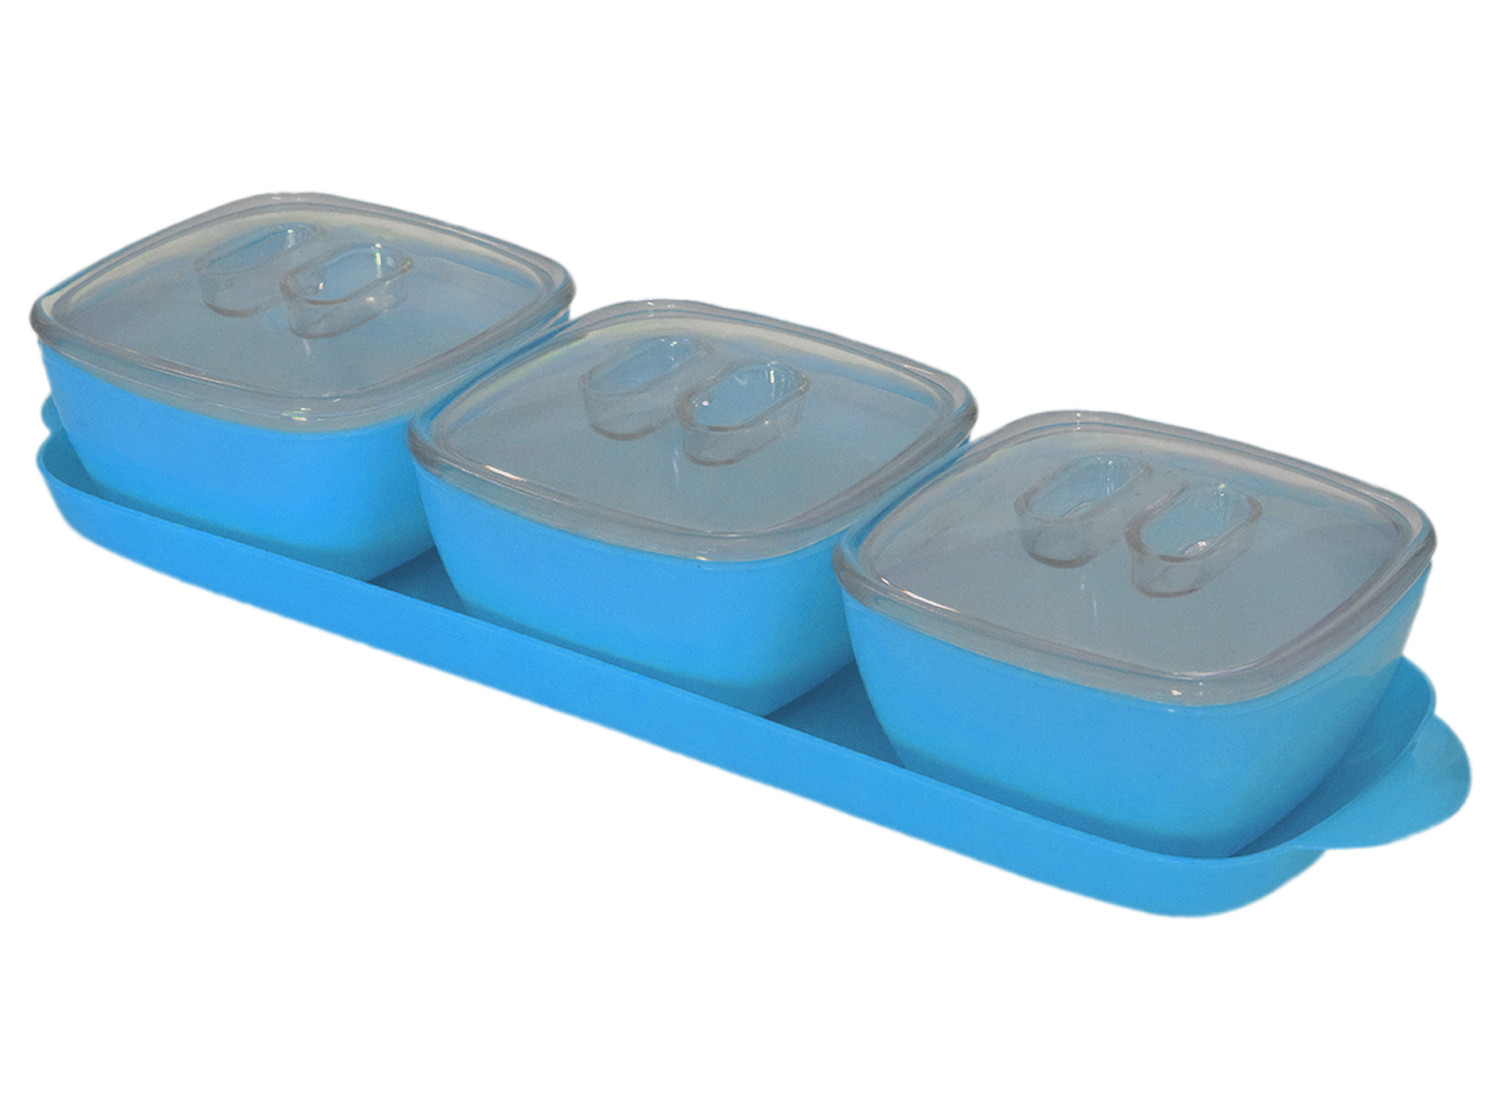 Kuber Industries Plastic 3 Bowls & 1 Tray Set For Serving & Store Dry Fruits, candies, Snacks With Silicon Rubberized Ring Lid (Blue)